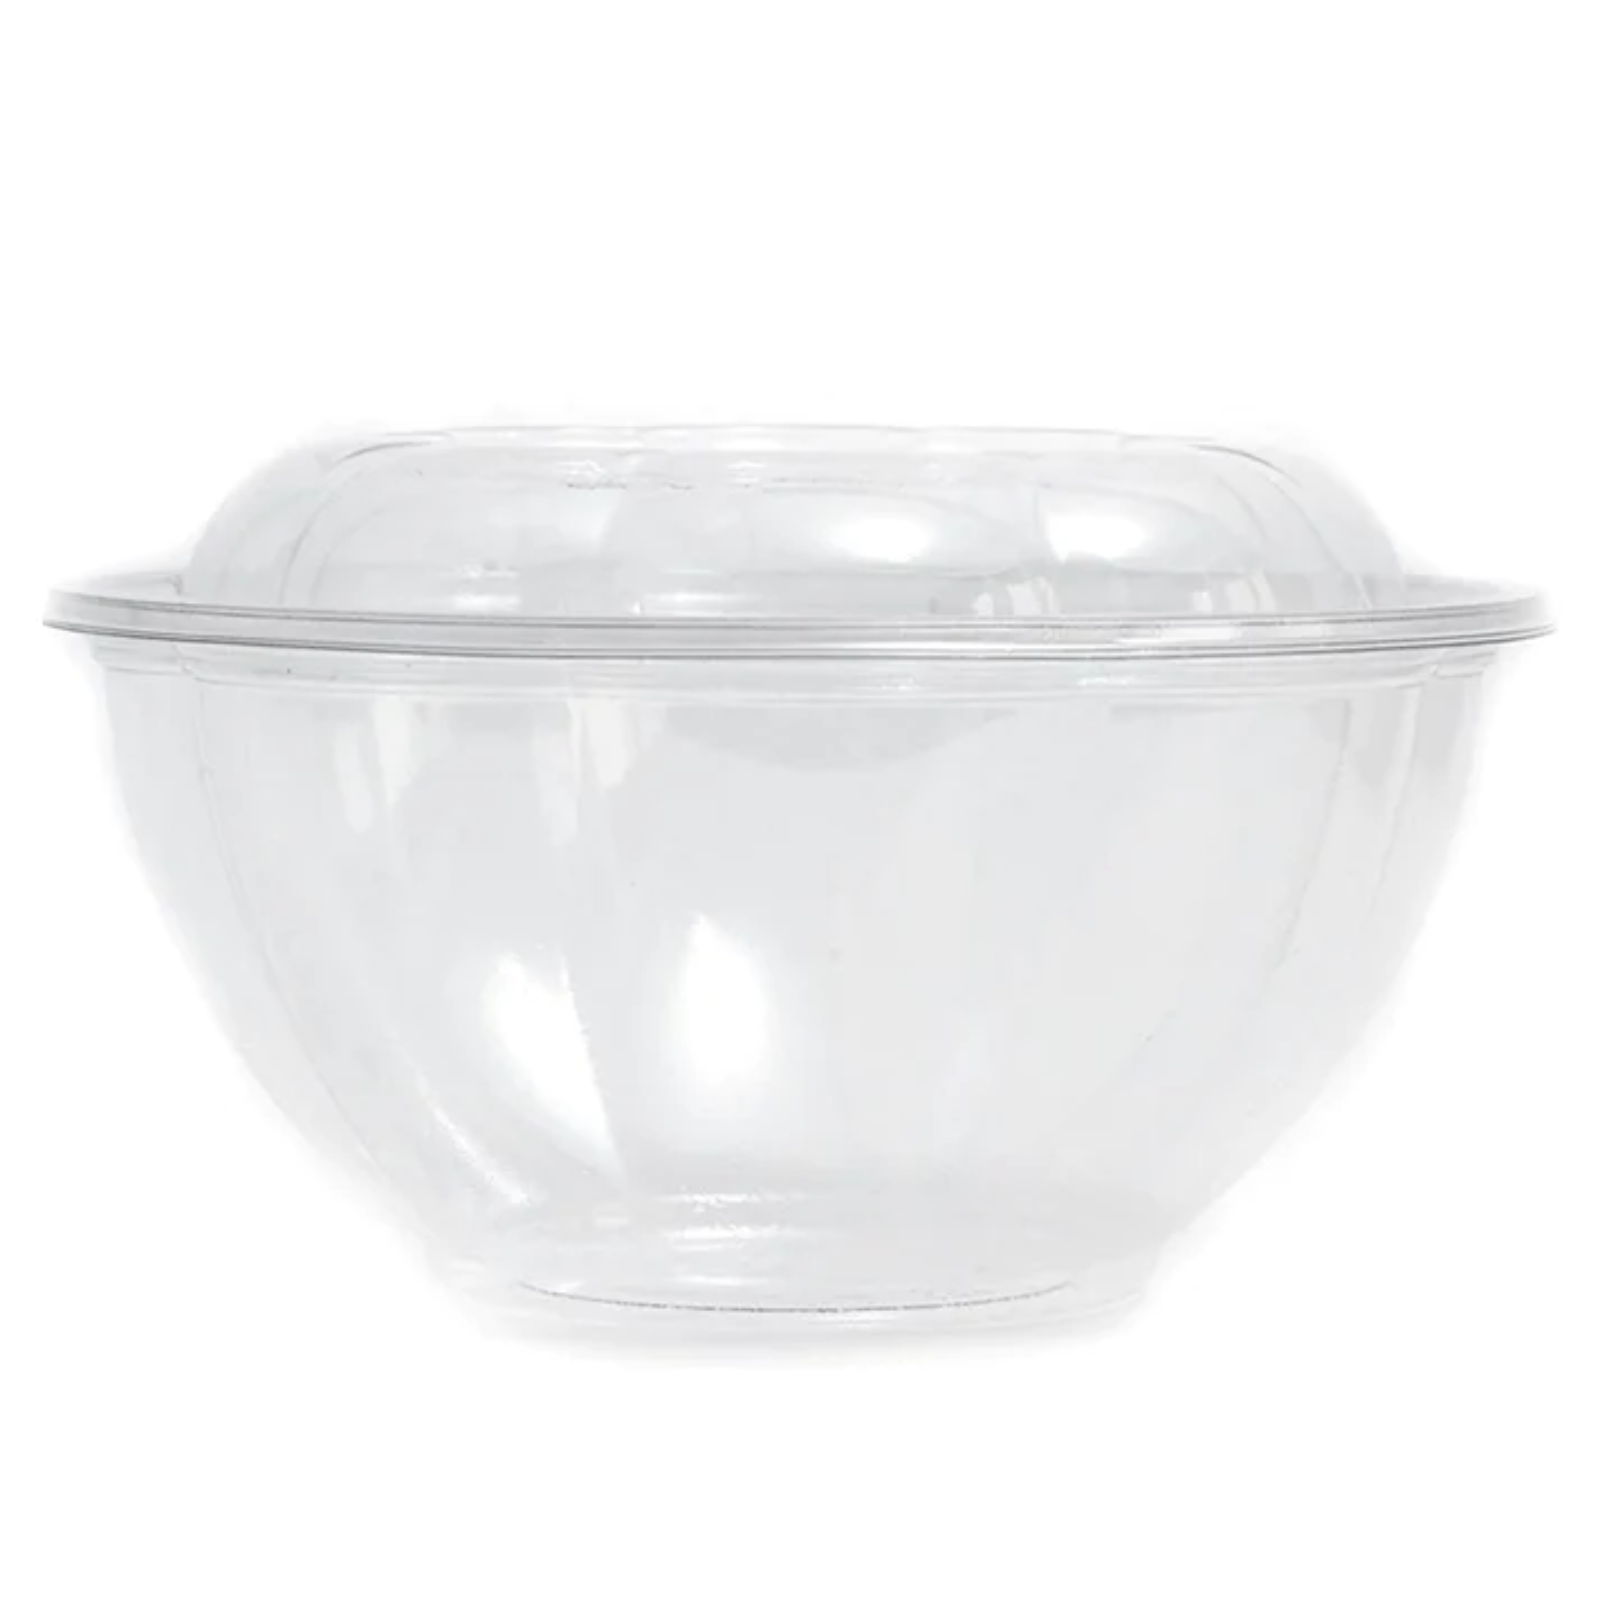 24oz Disposable Rose / Salad Bowls To-Go Containers with Airtight Lids Smoothie Cups VeZee   